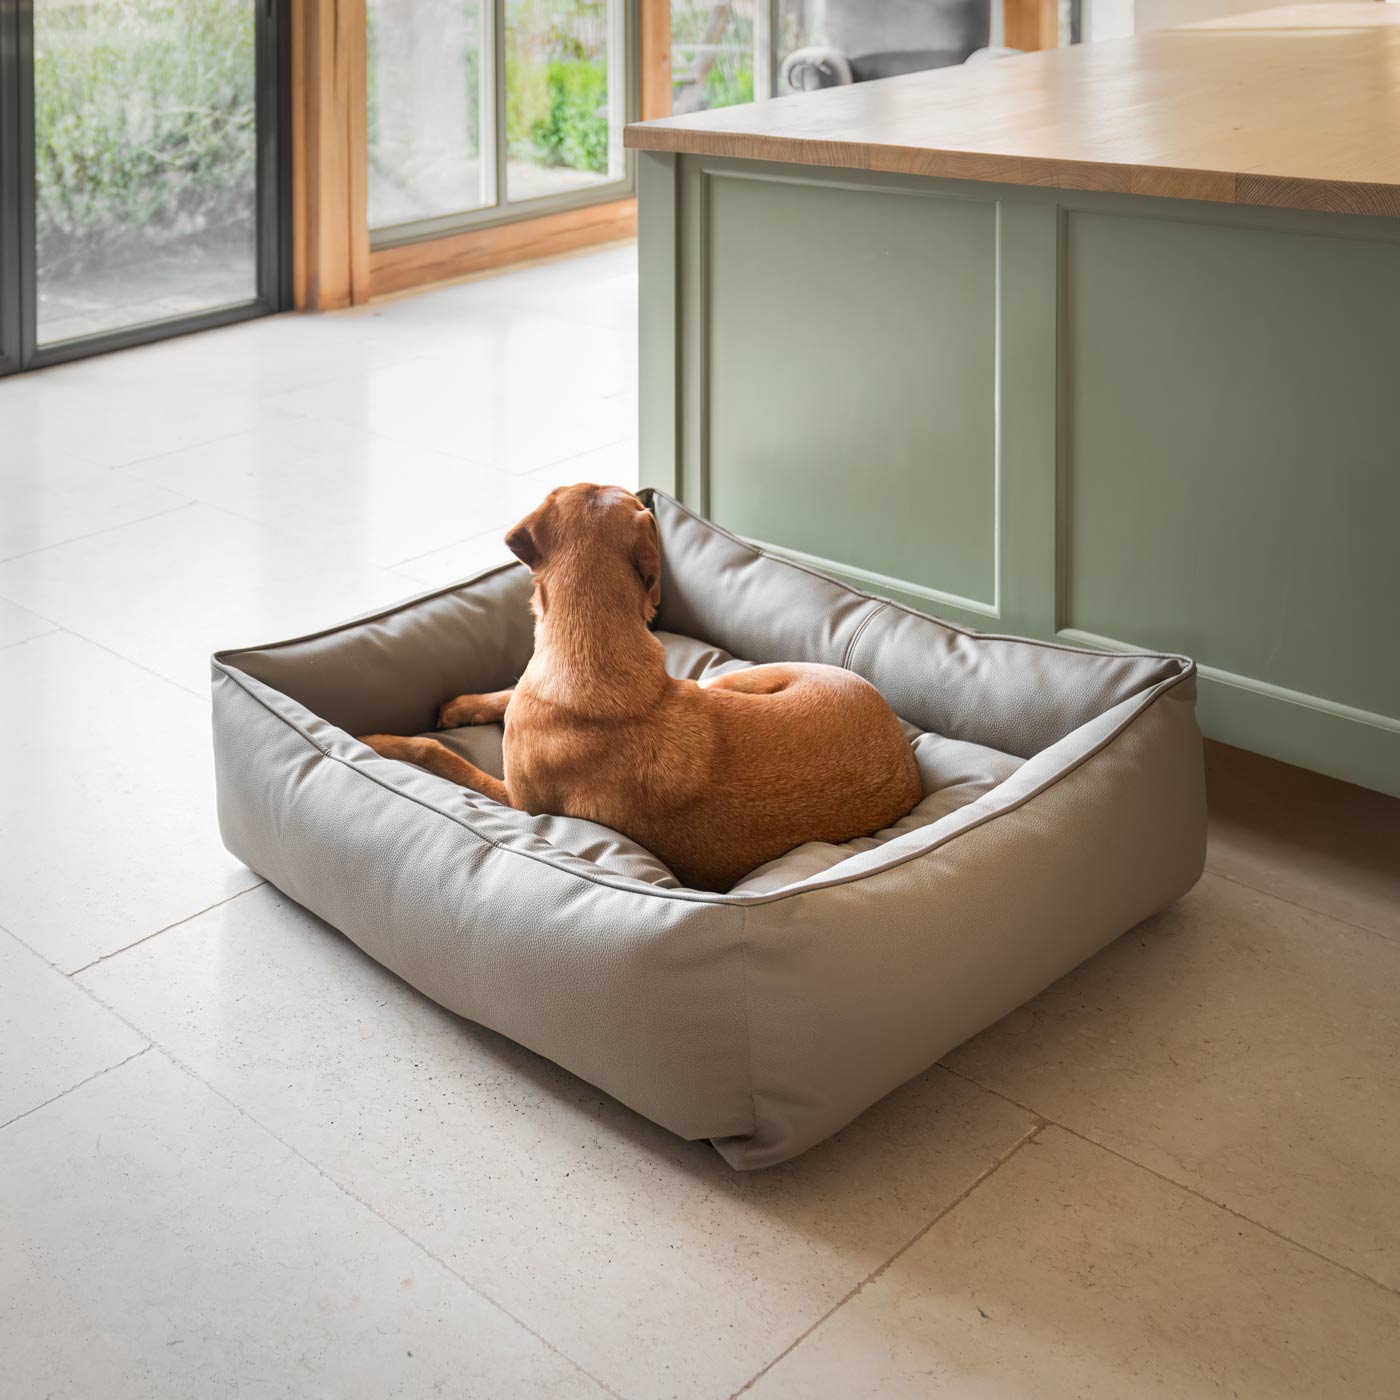 Luxury Handmade Box Bed in Rhino Tough Faux Leather, in Camel, Perfect For Your Pets Nap Time! Available To Personalise at Lords & Labradors